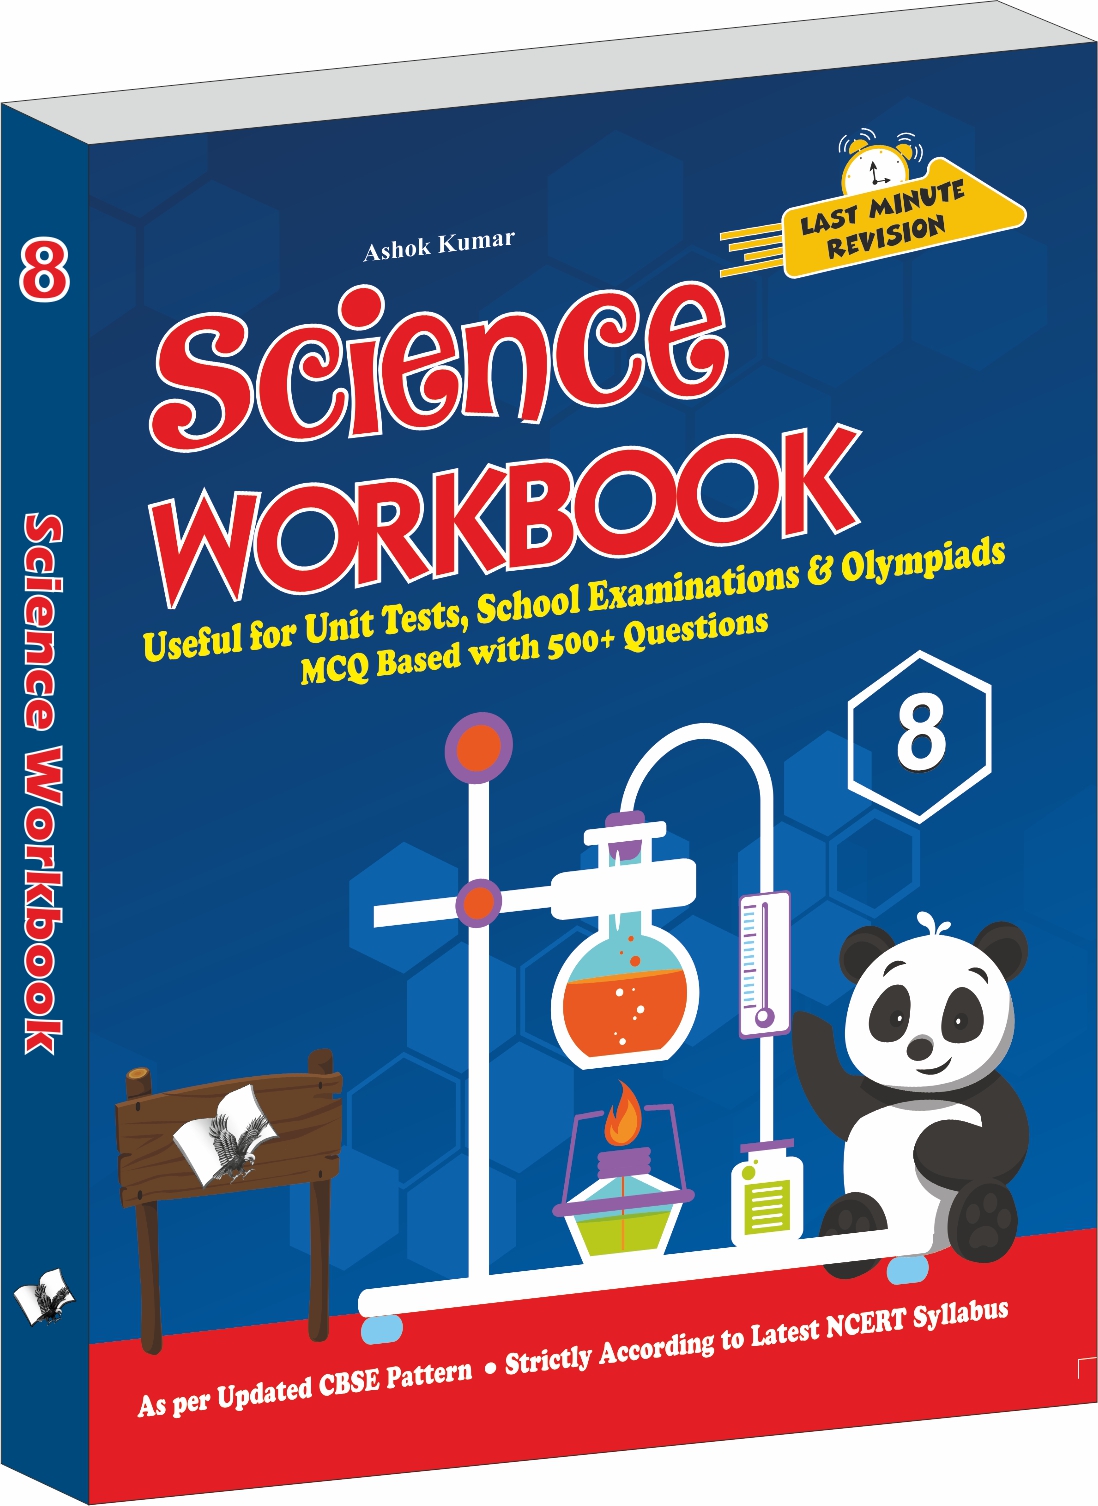 Science Workbook Class 8-Useful for Unit Tests, School Examinations & Olympiads